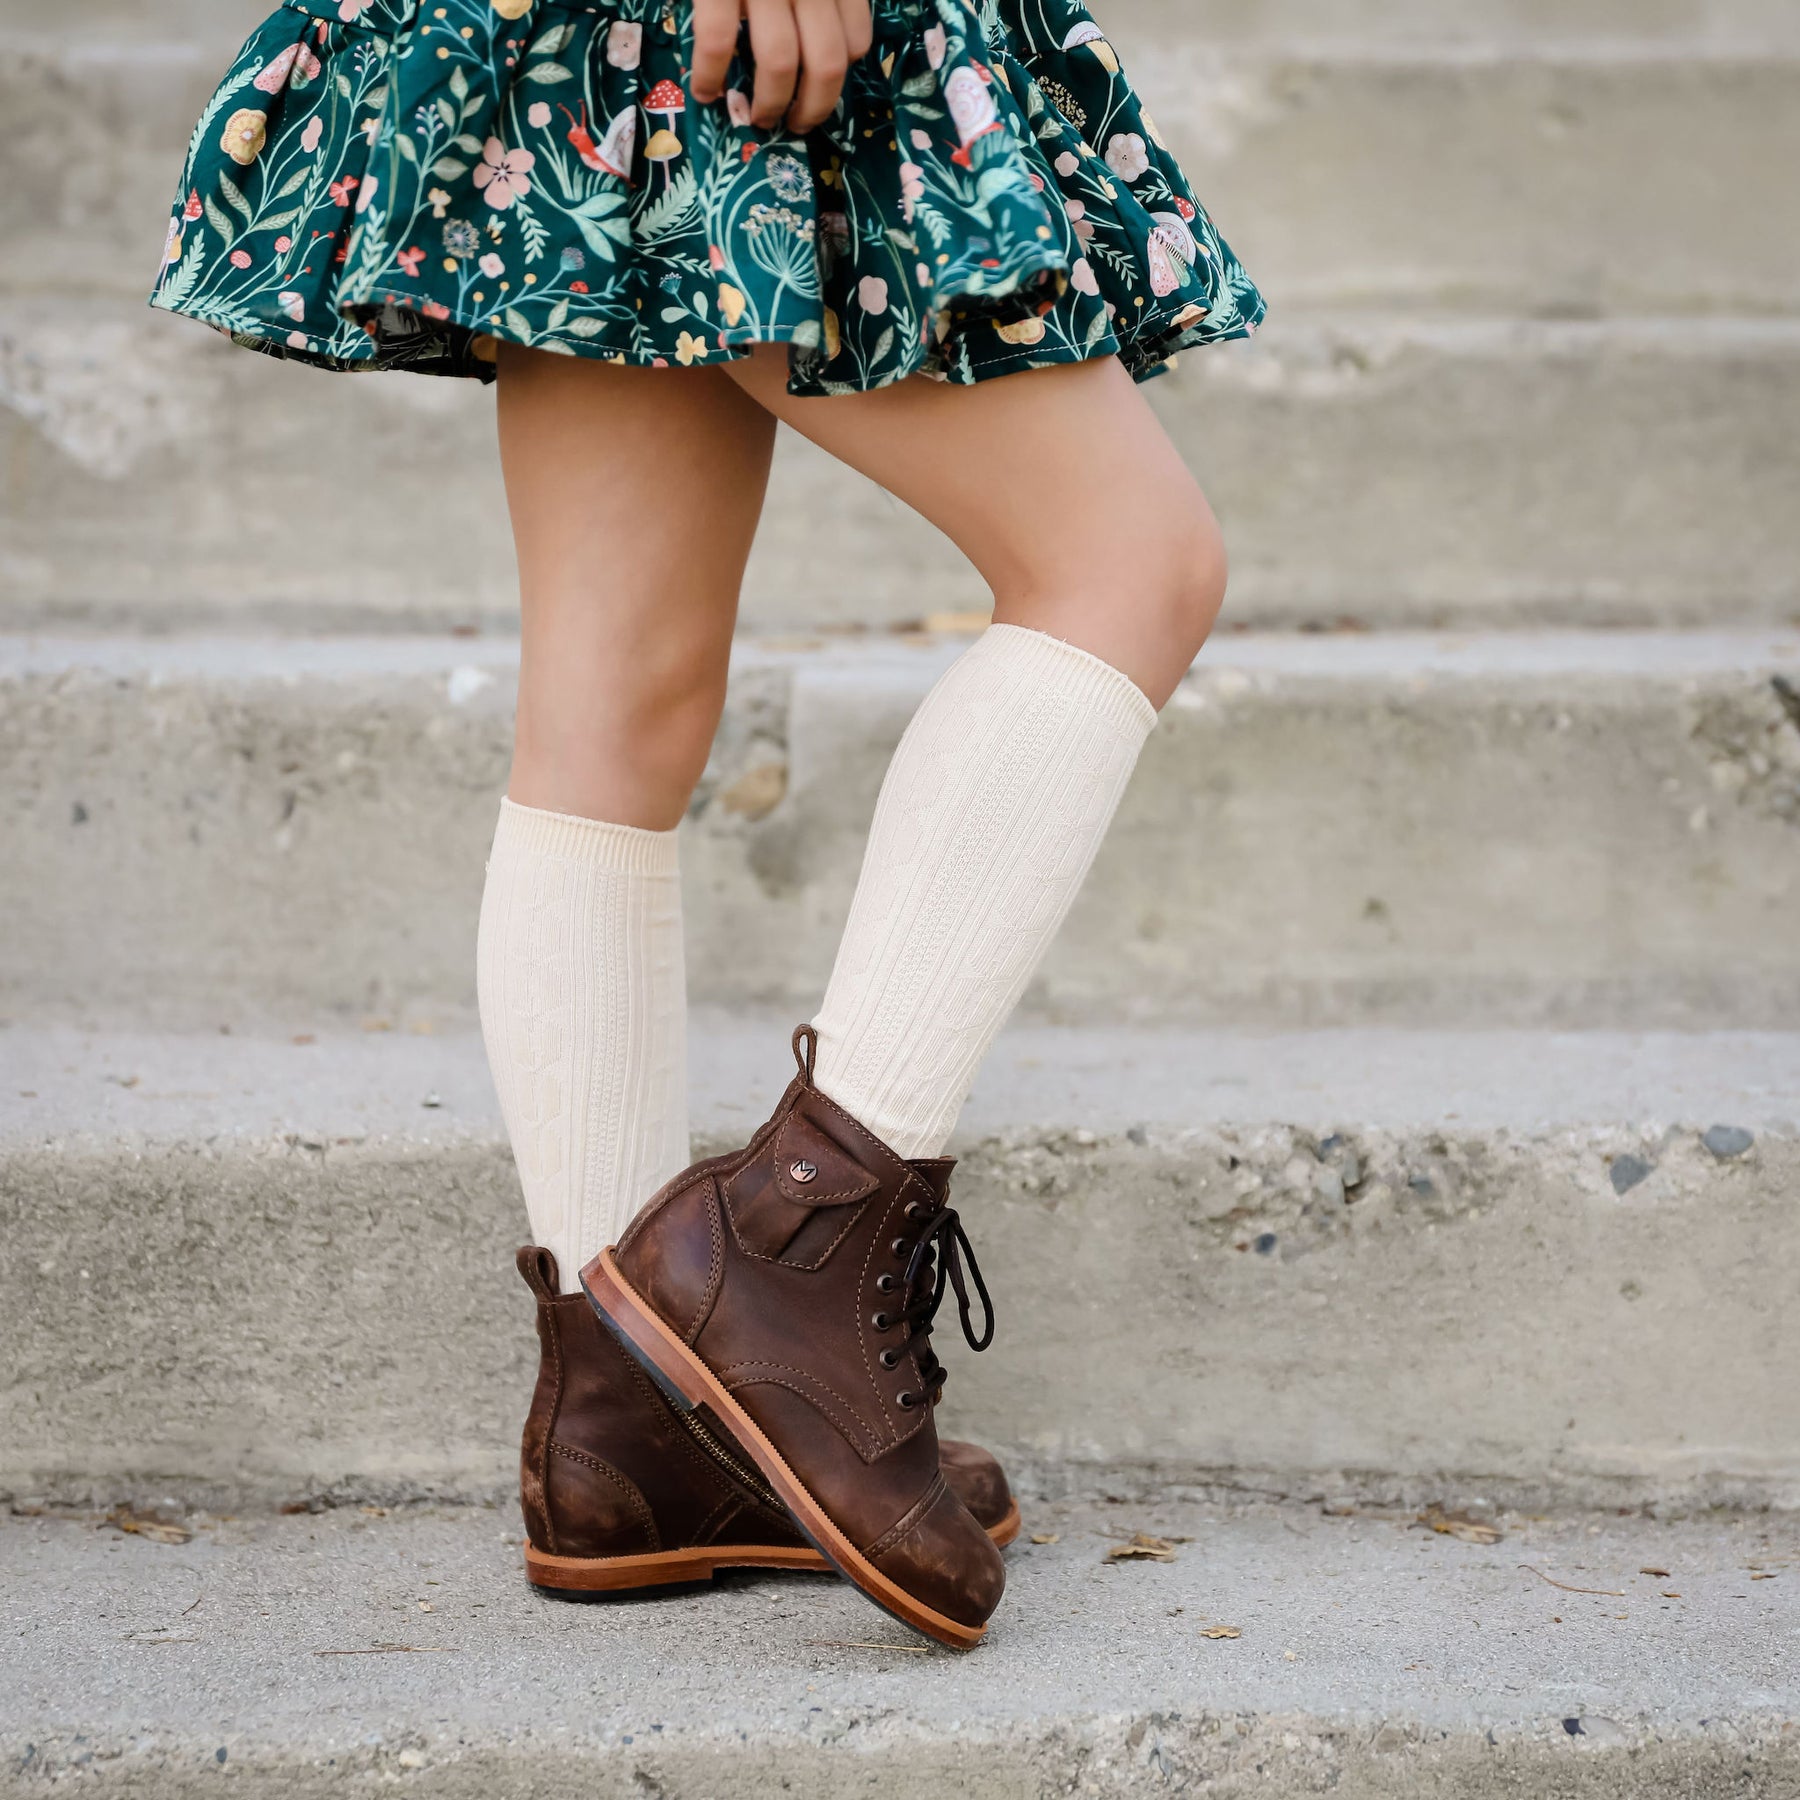 Little Stocking Co.- Sugar Almond Cable Knit Tights